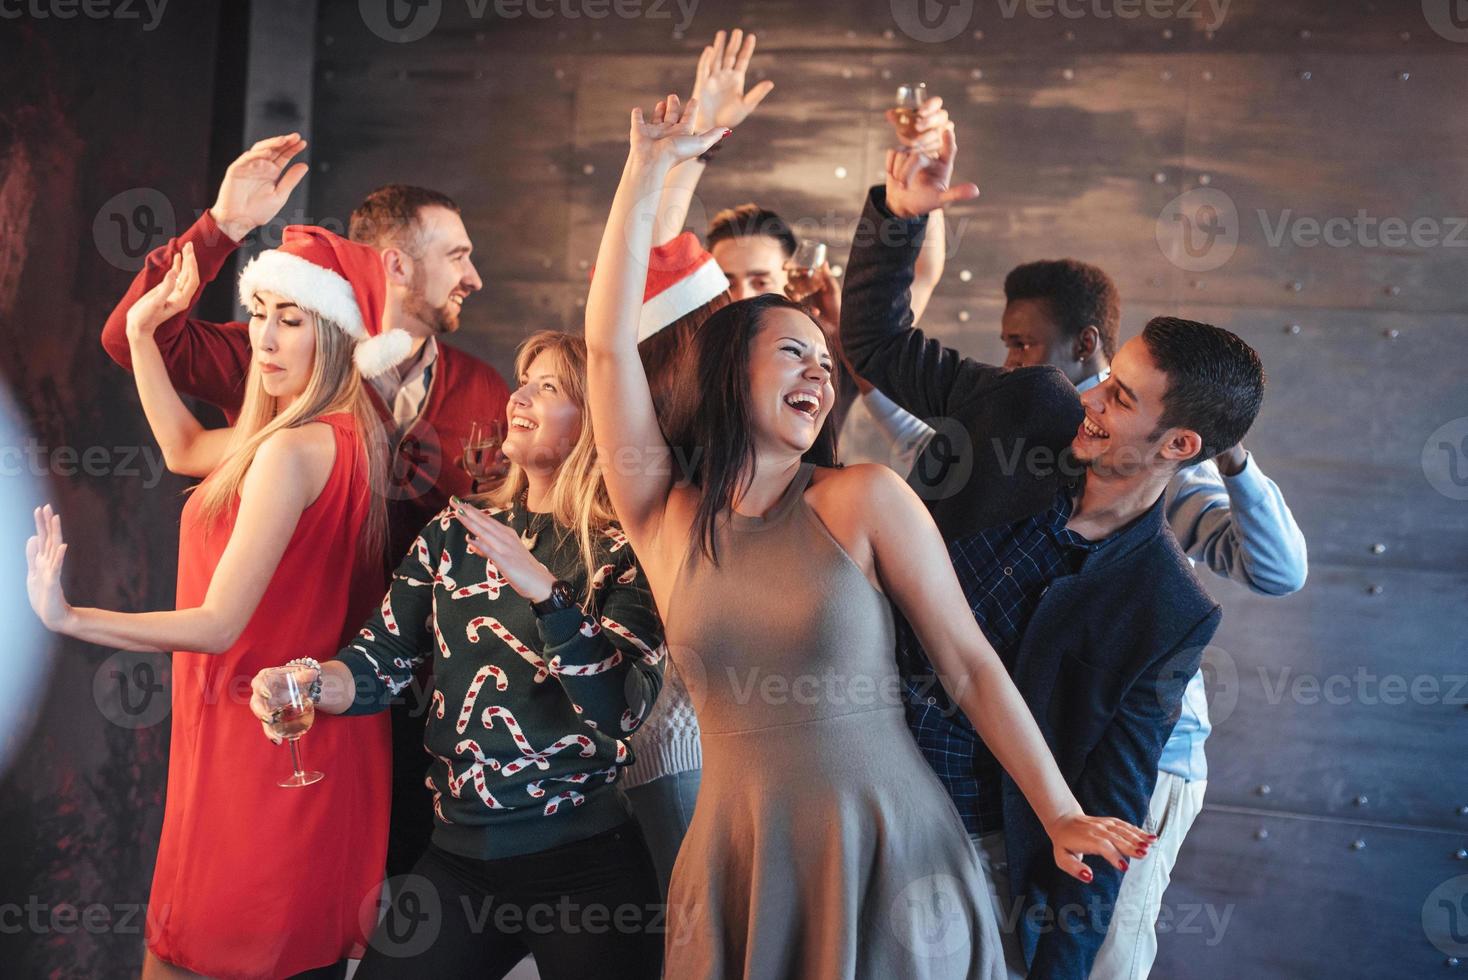 Party with friends. They love Christmas. Group of cheerful young people carrying sparklers and champagne flutes dancing in new year party and looking happy. Concepts about togetherness lifestyle photo